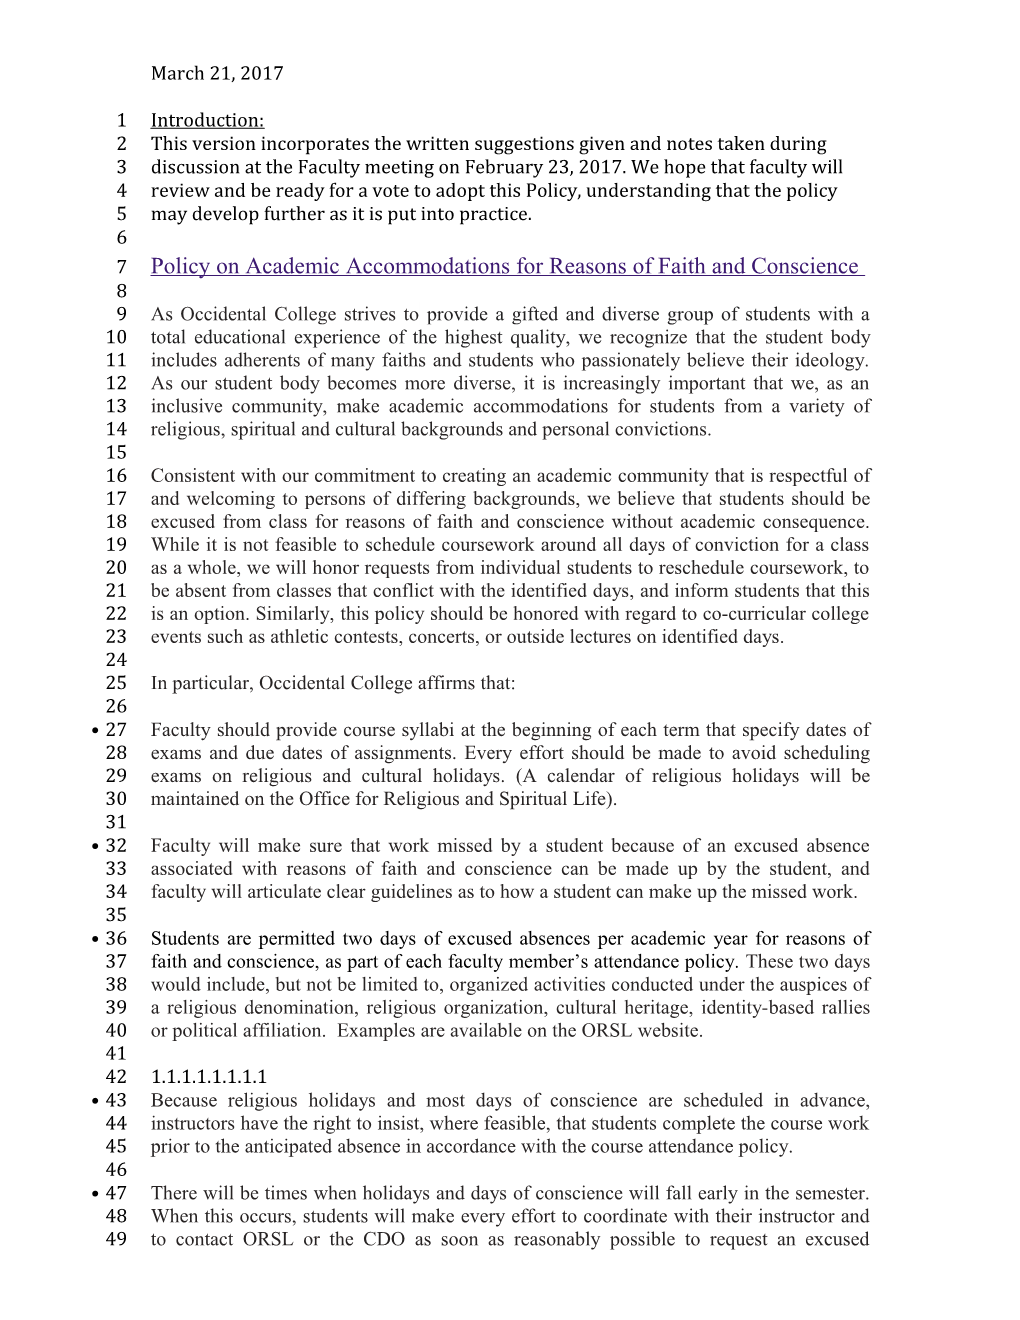 Policy on Academic Accommodations for Reasons of Faith and Conscience